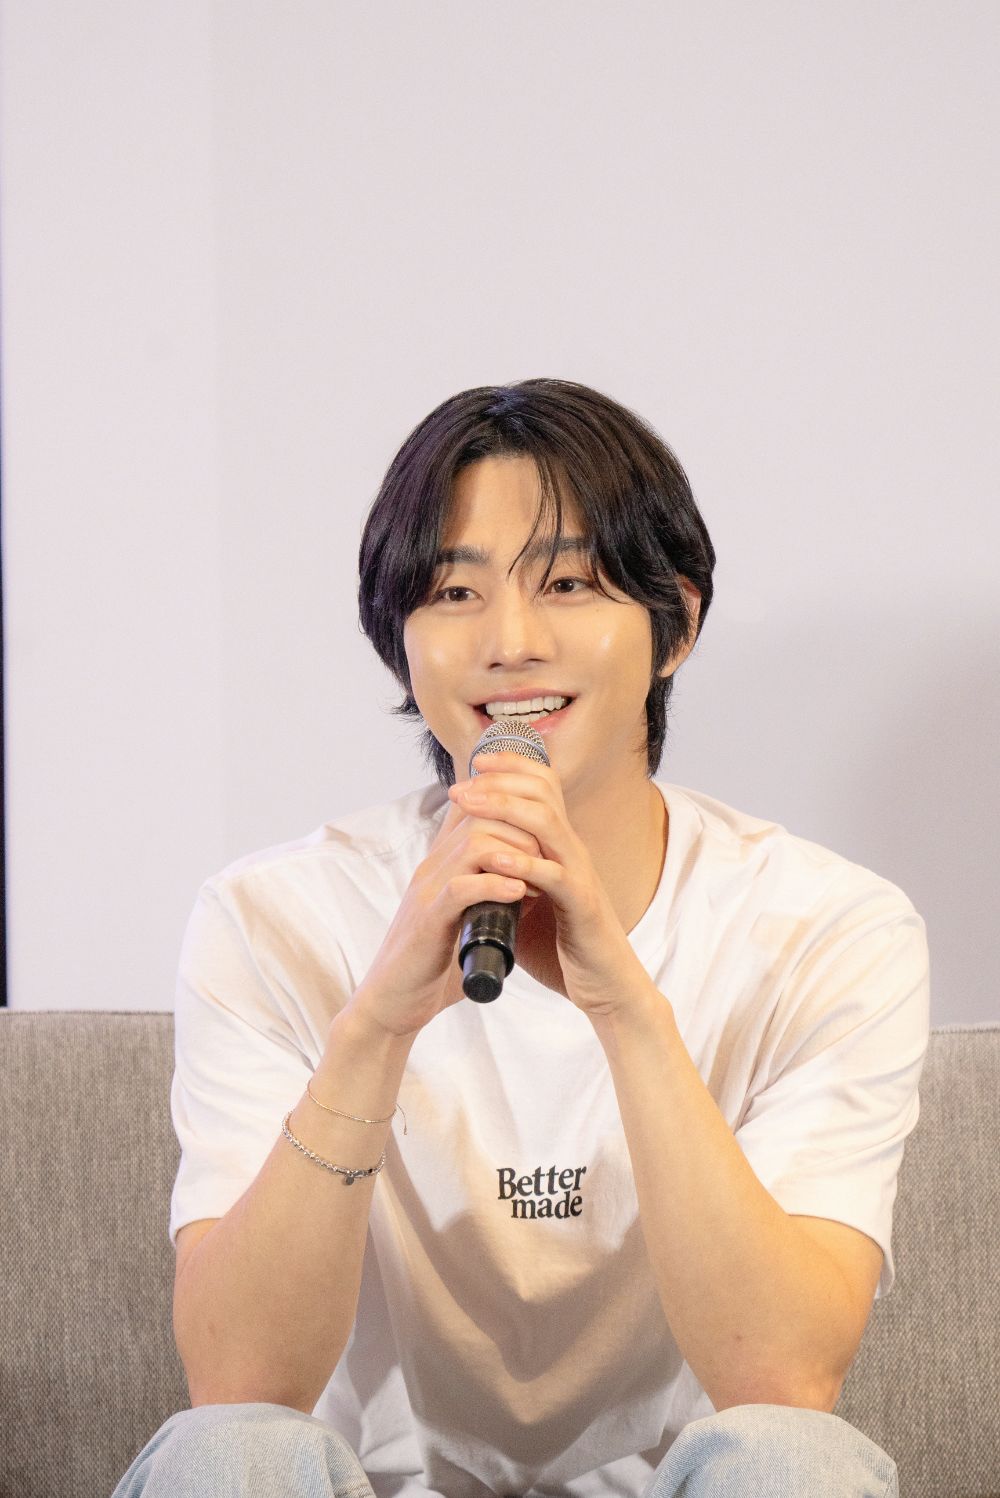 Here and Now: Ahn Hyo Seop Shares What Happiness Means To Him As He Visits Manila For The First Time